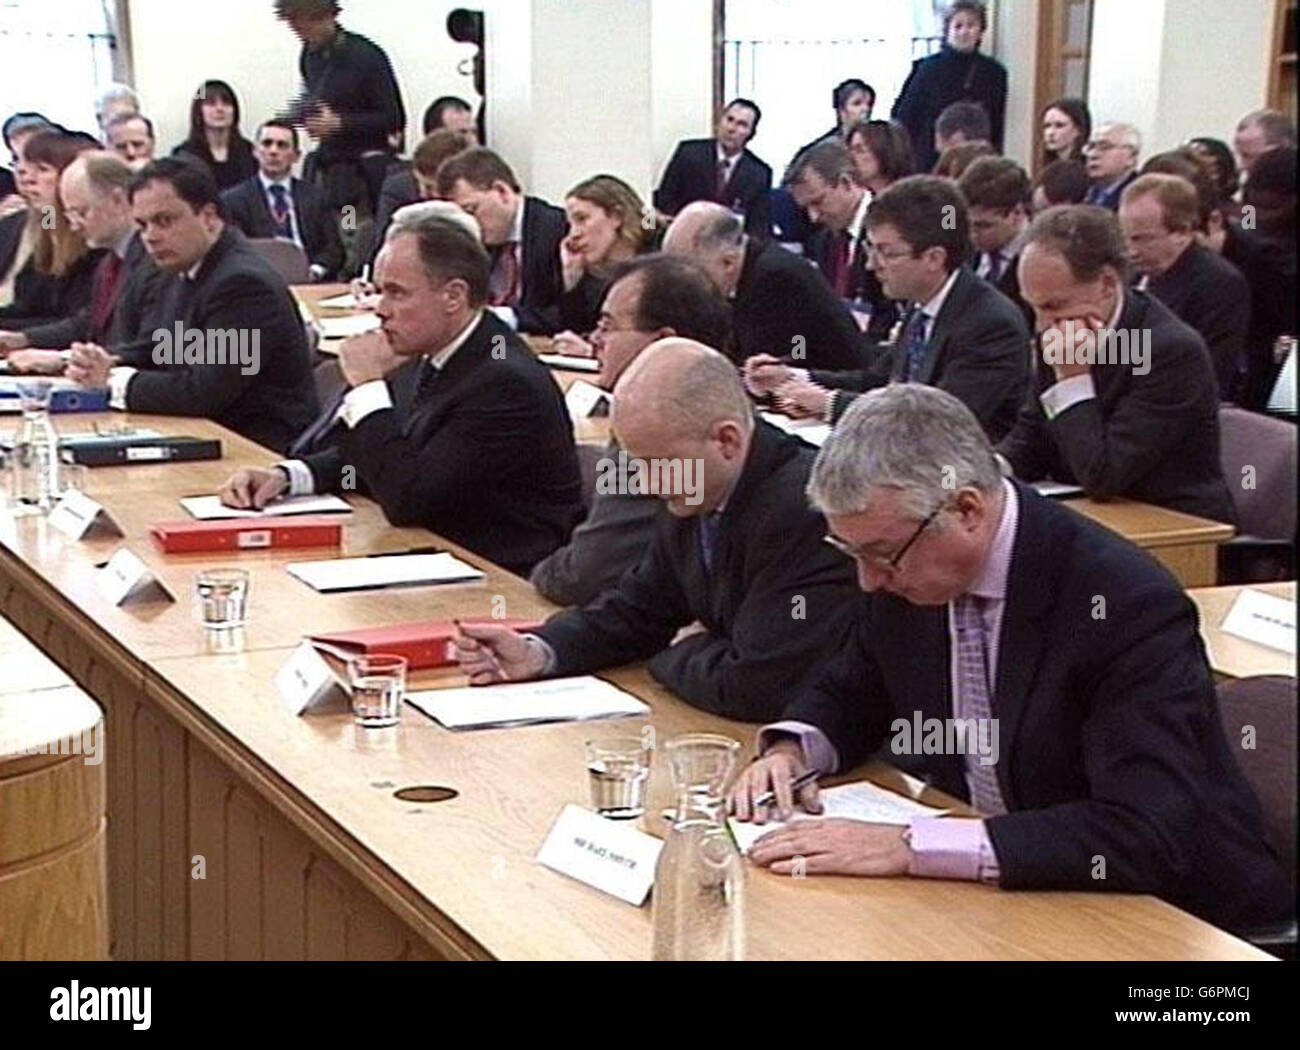 Lawyers and solicitors listen as Lord Hutton, speaks at the High Court in central London, announces the results of his inquiry into the events surrounding the death of Government scientist Dr David Kelly. Stock Photo